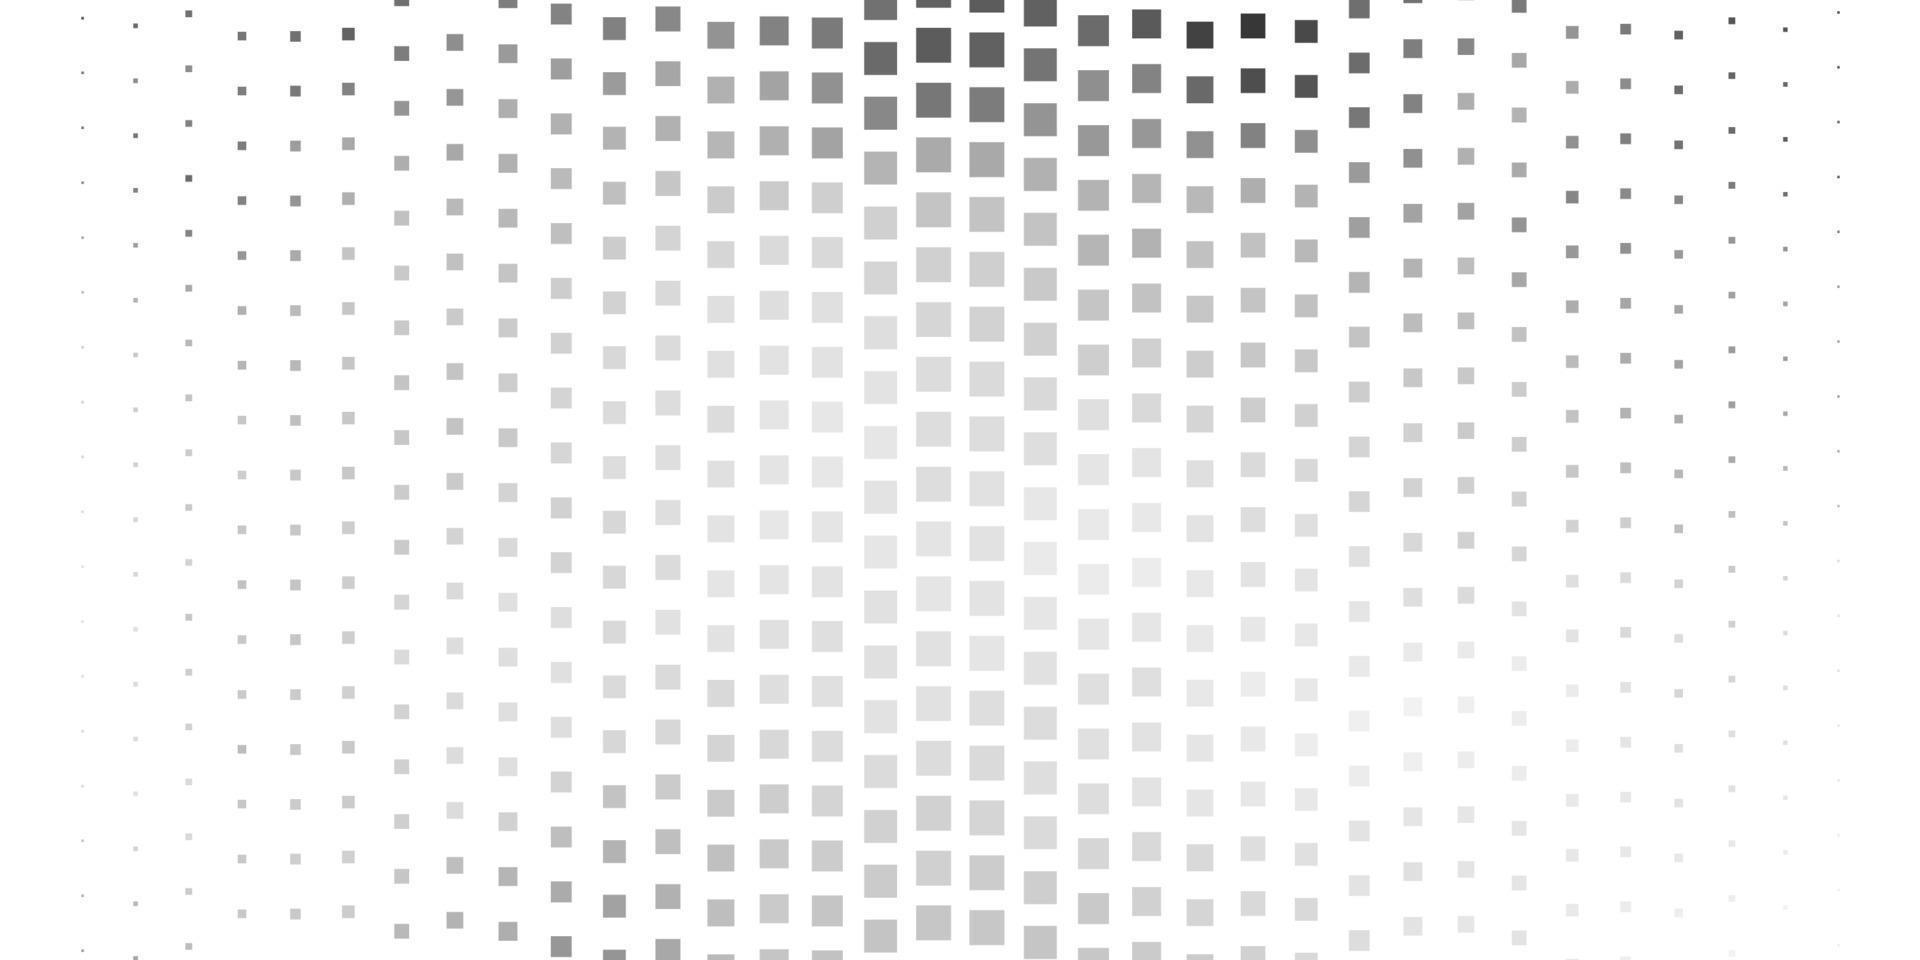 Light Gray vector backdrop with rectangles.